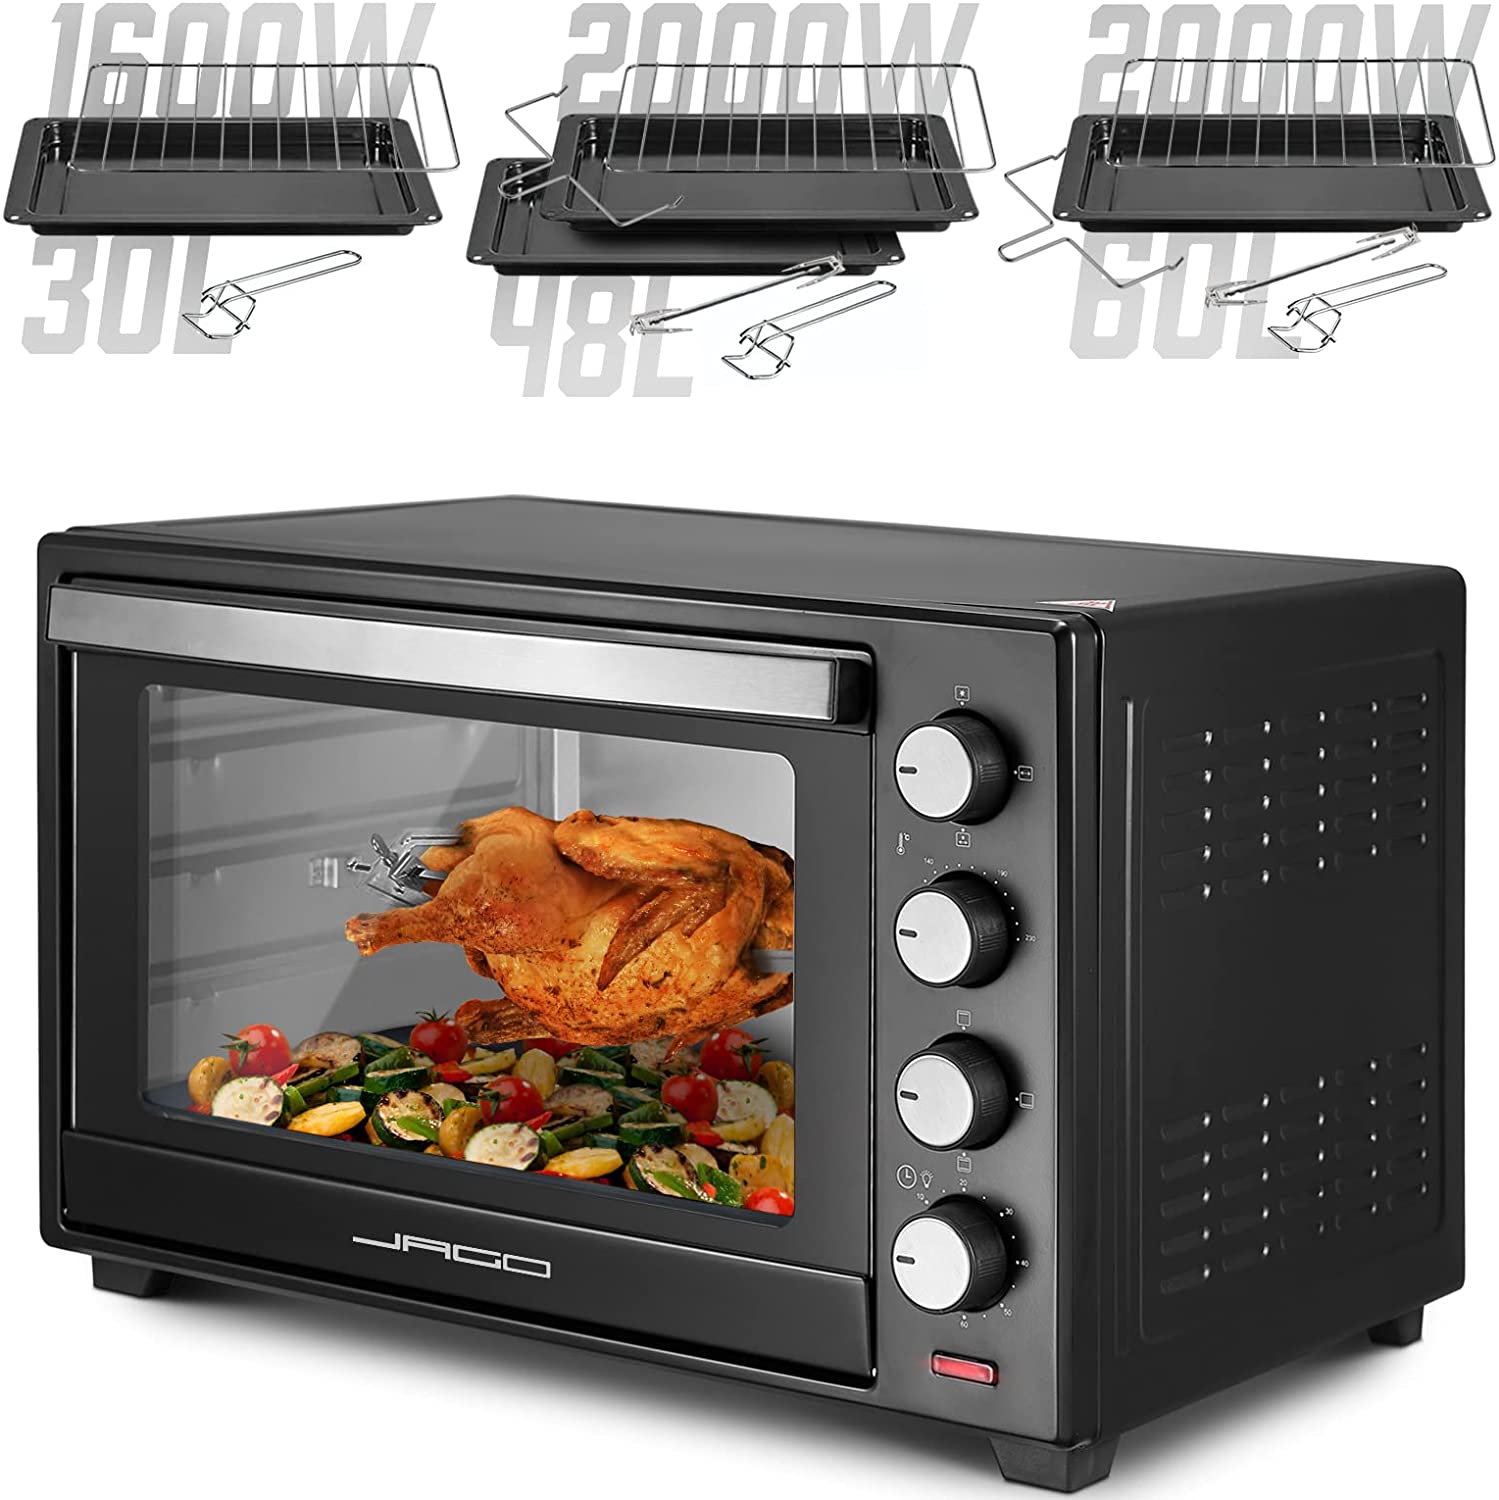 JJago® Mini Oven with Air Circulation, Model Selection, 100 to 230 °C, Timer (0-60 Min), with Wire Mesh, Baking Tray & Accessories, Black - Mini Oven, Mini Kitchen, Barbecue, Pizza Oven